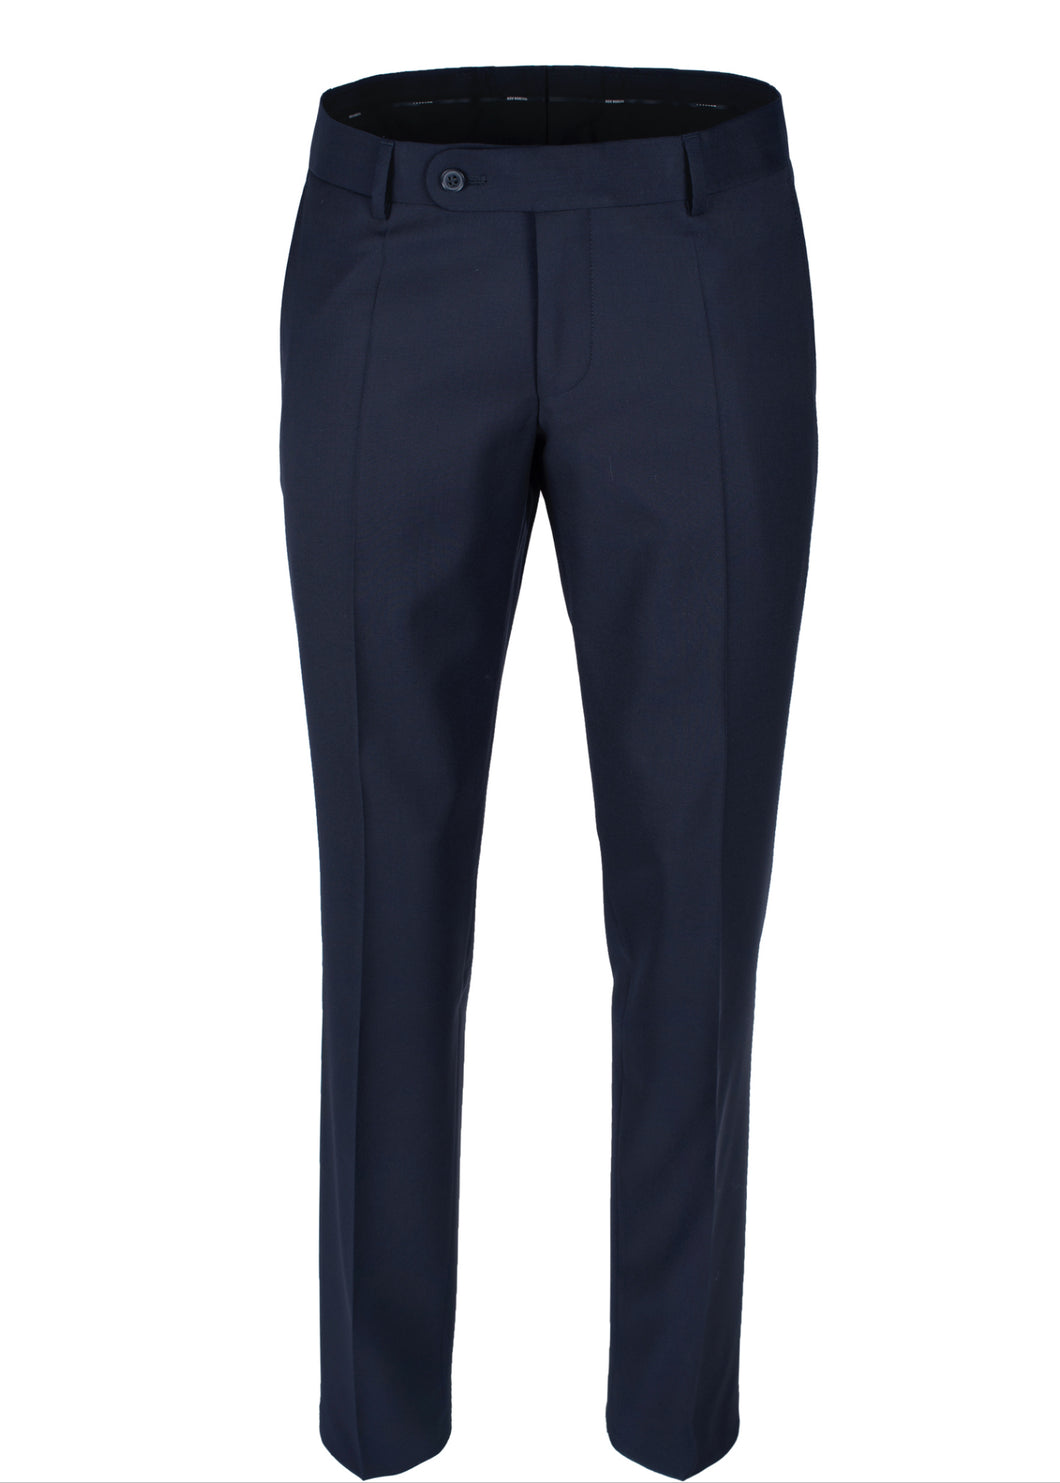 ROY ROBSON Freestyle Navy Suit Trousers 5000 A401